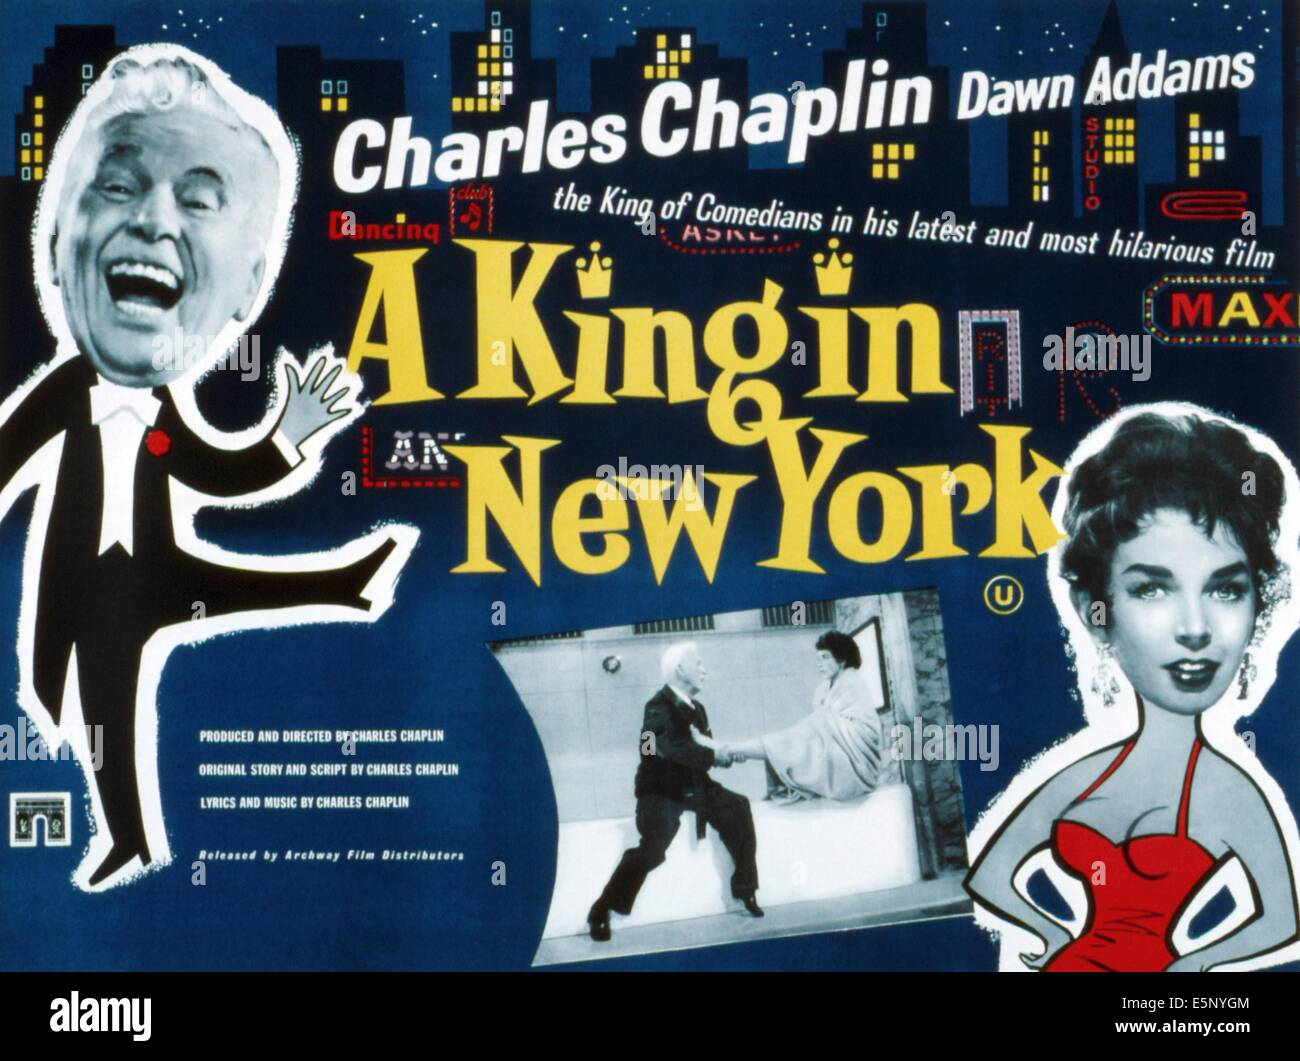 A KING IN NEW YORK, from left to right, on both the artwork and the inset scene: Charlie Chaplin, Dawn Addams, 1957 Stock Photo